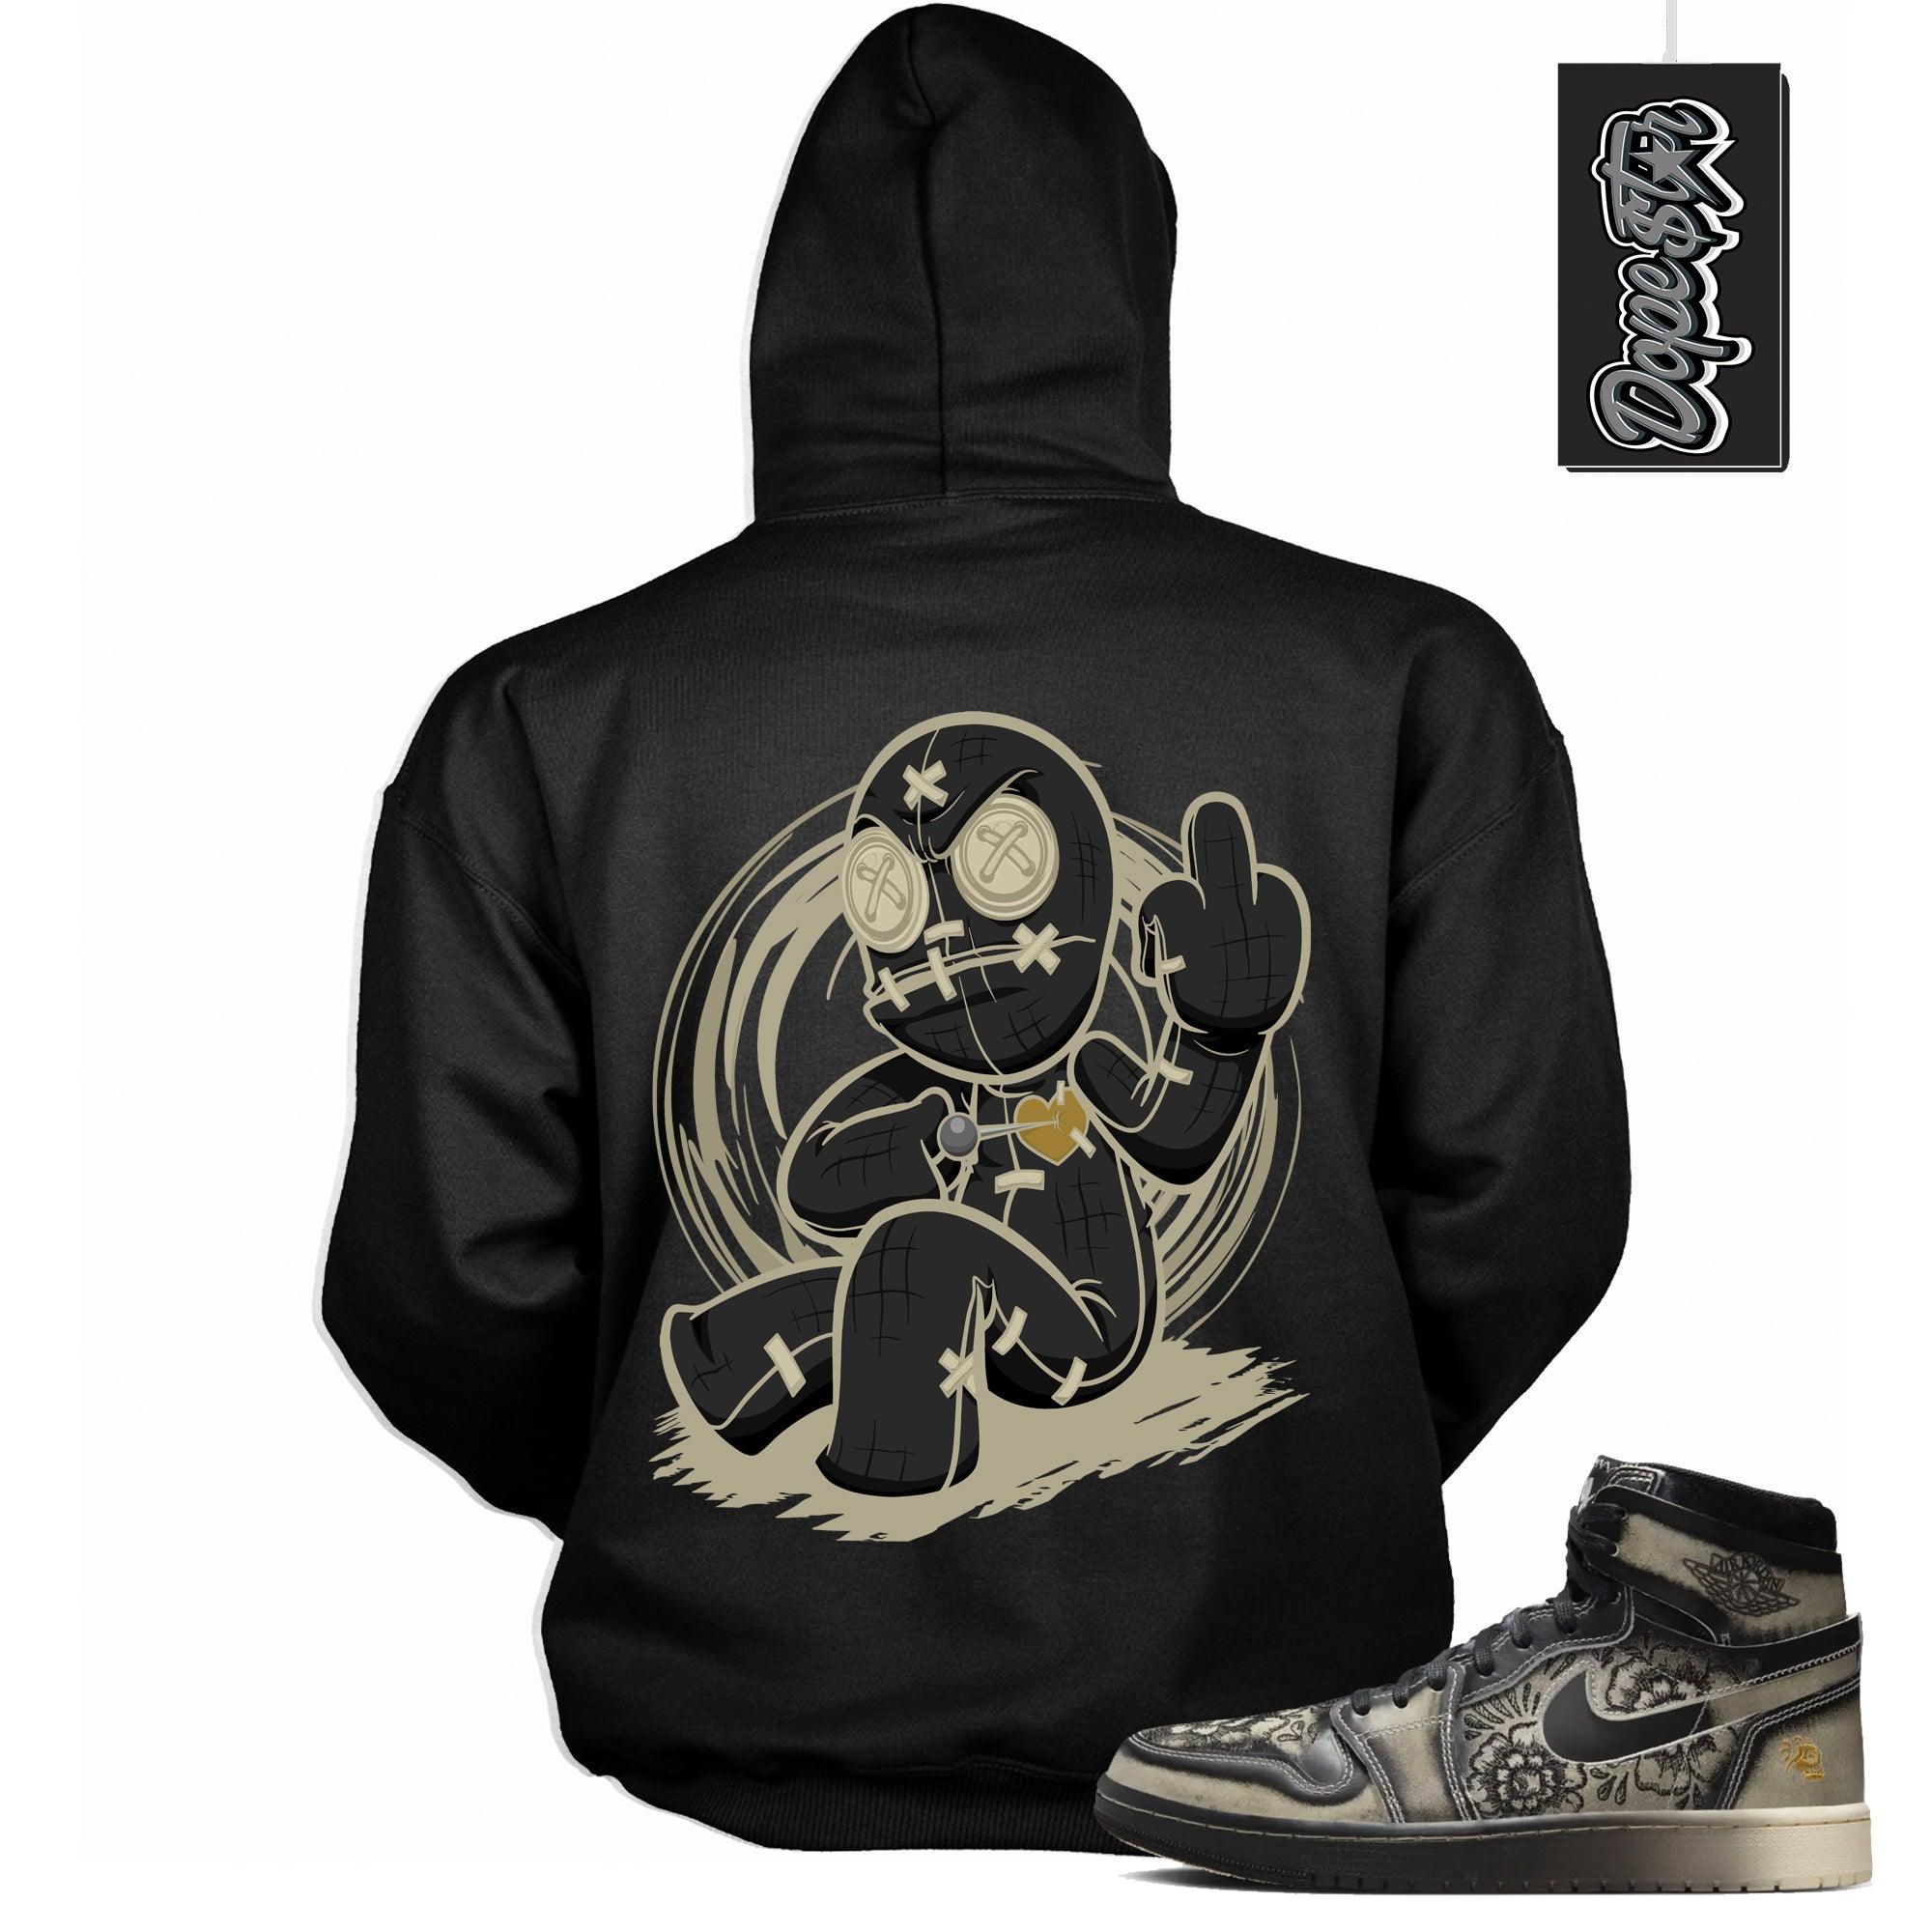 Cool Black Graphic Hoodie with “ VooDoo Doll “ print, that perfectly matches Air Jordan 1 High Zoom Comfort 2 Dia de Muertos Black and Pale Ivory sneakers